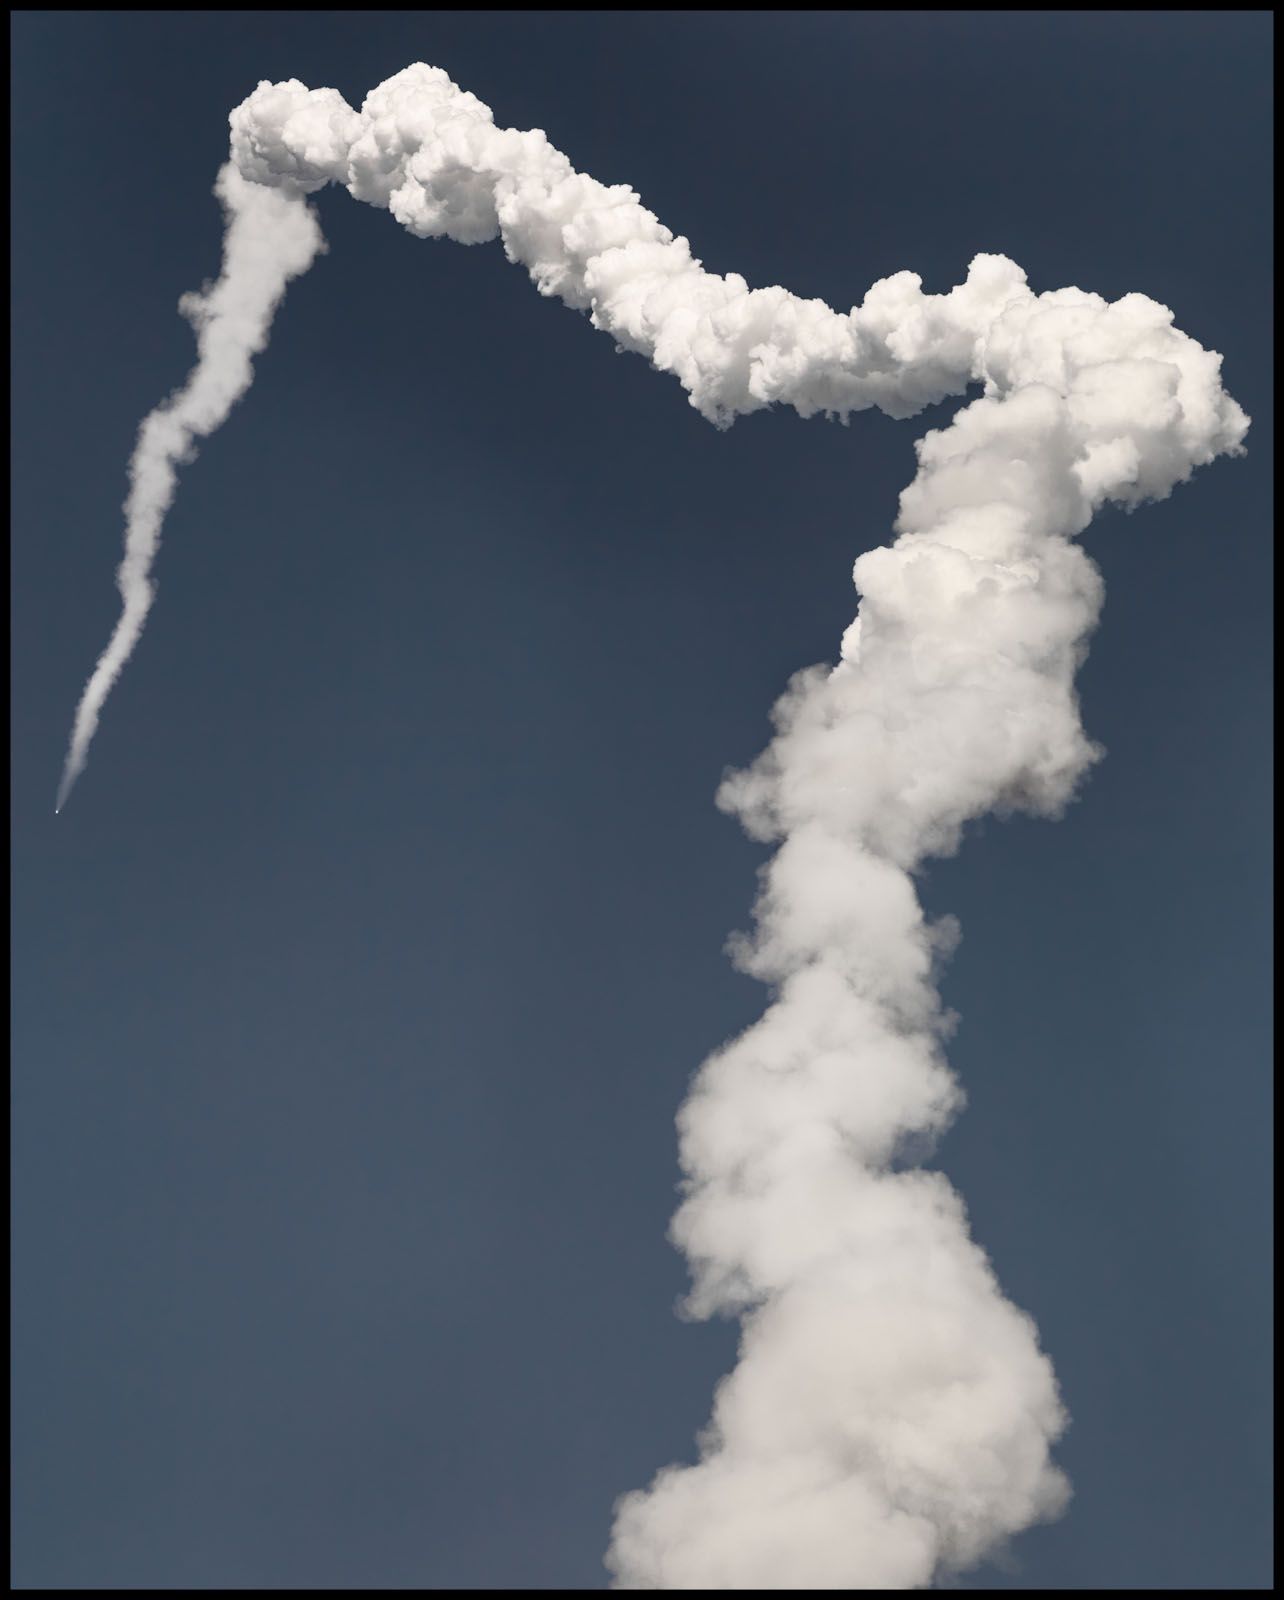 STS-133 Discovery Launch - Kennedy Space Center, FL - Texas Monthly